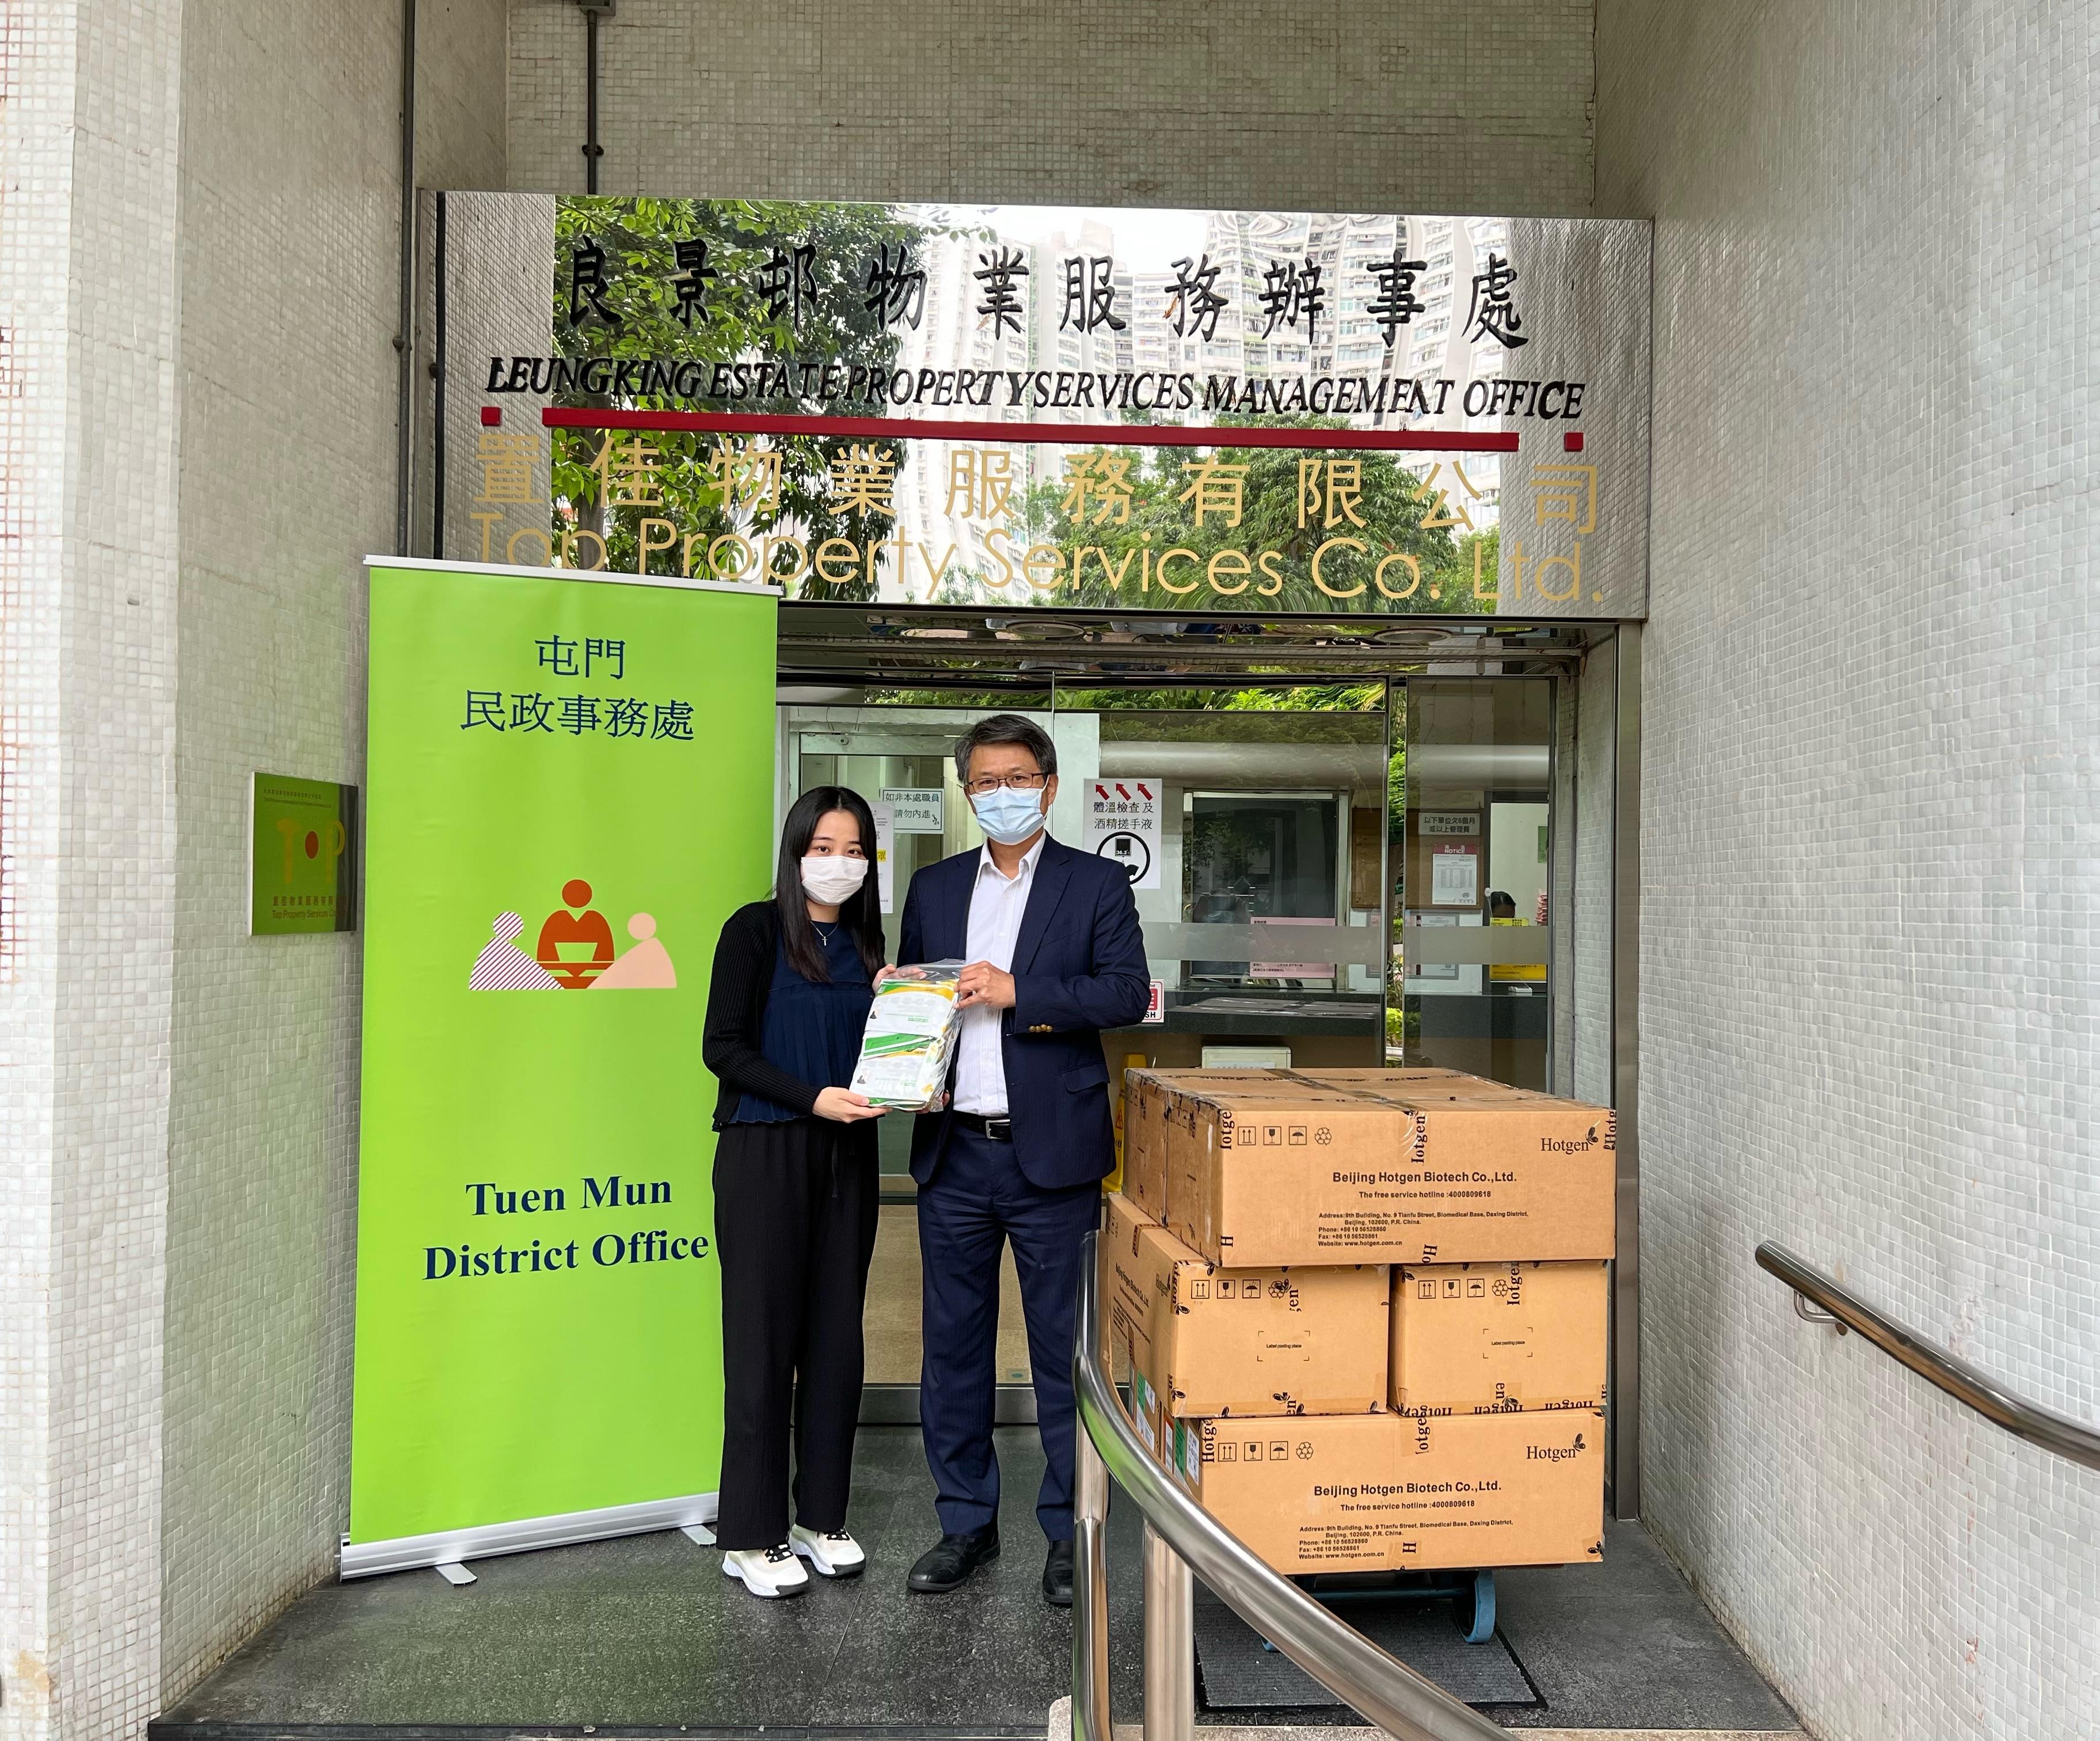 The Tuen Mun District Office today (May 23) distributed COVID-19 rapid test kits to households, cleansing workers and property management staff living and working in Leung King Estate for voluntary testing through the property management company.